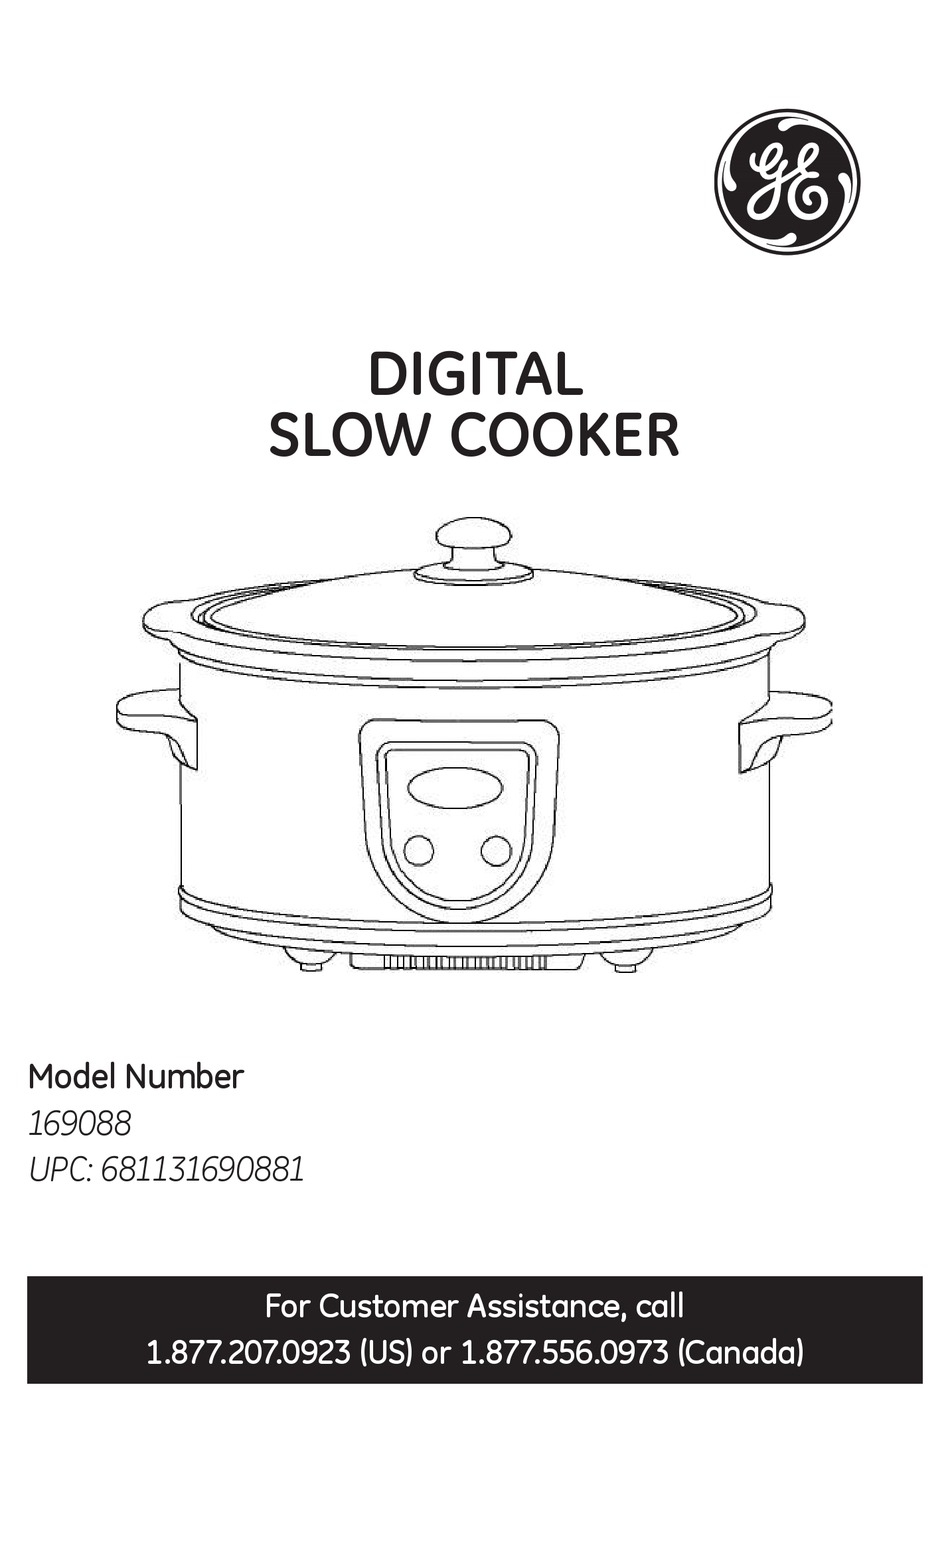 GE Slow Cooker 898680 User Guide